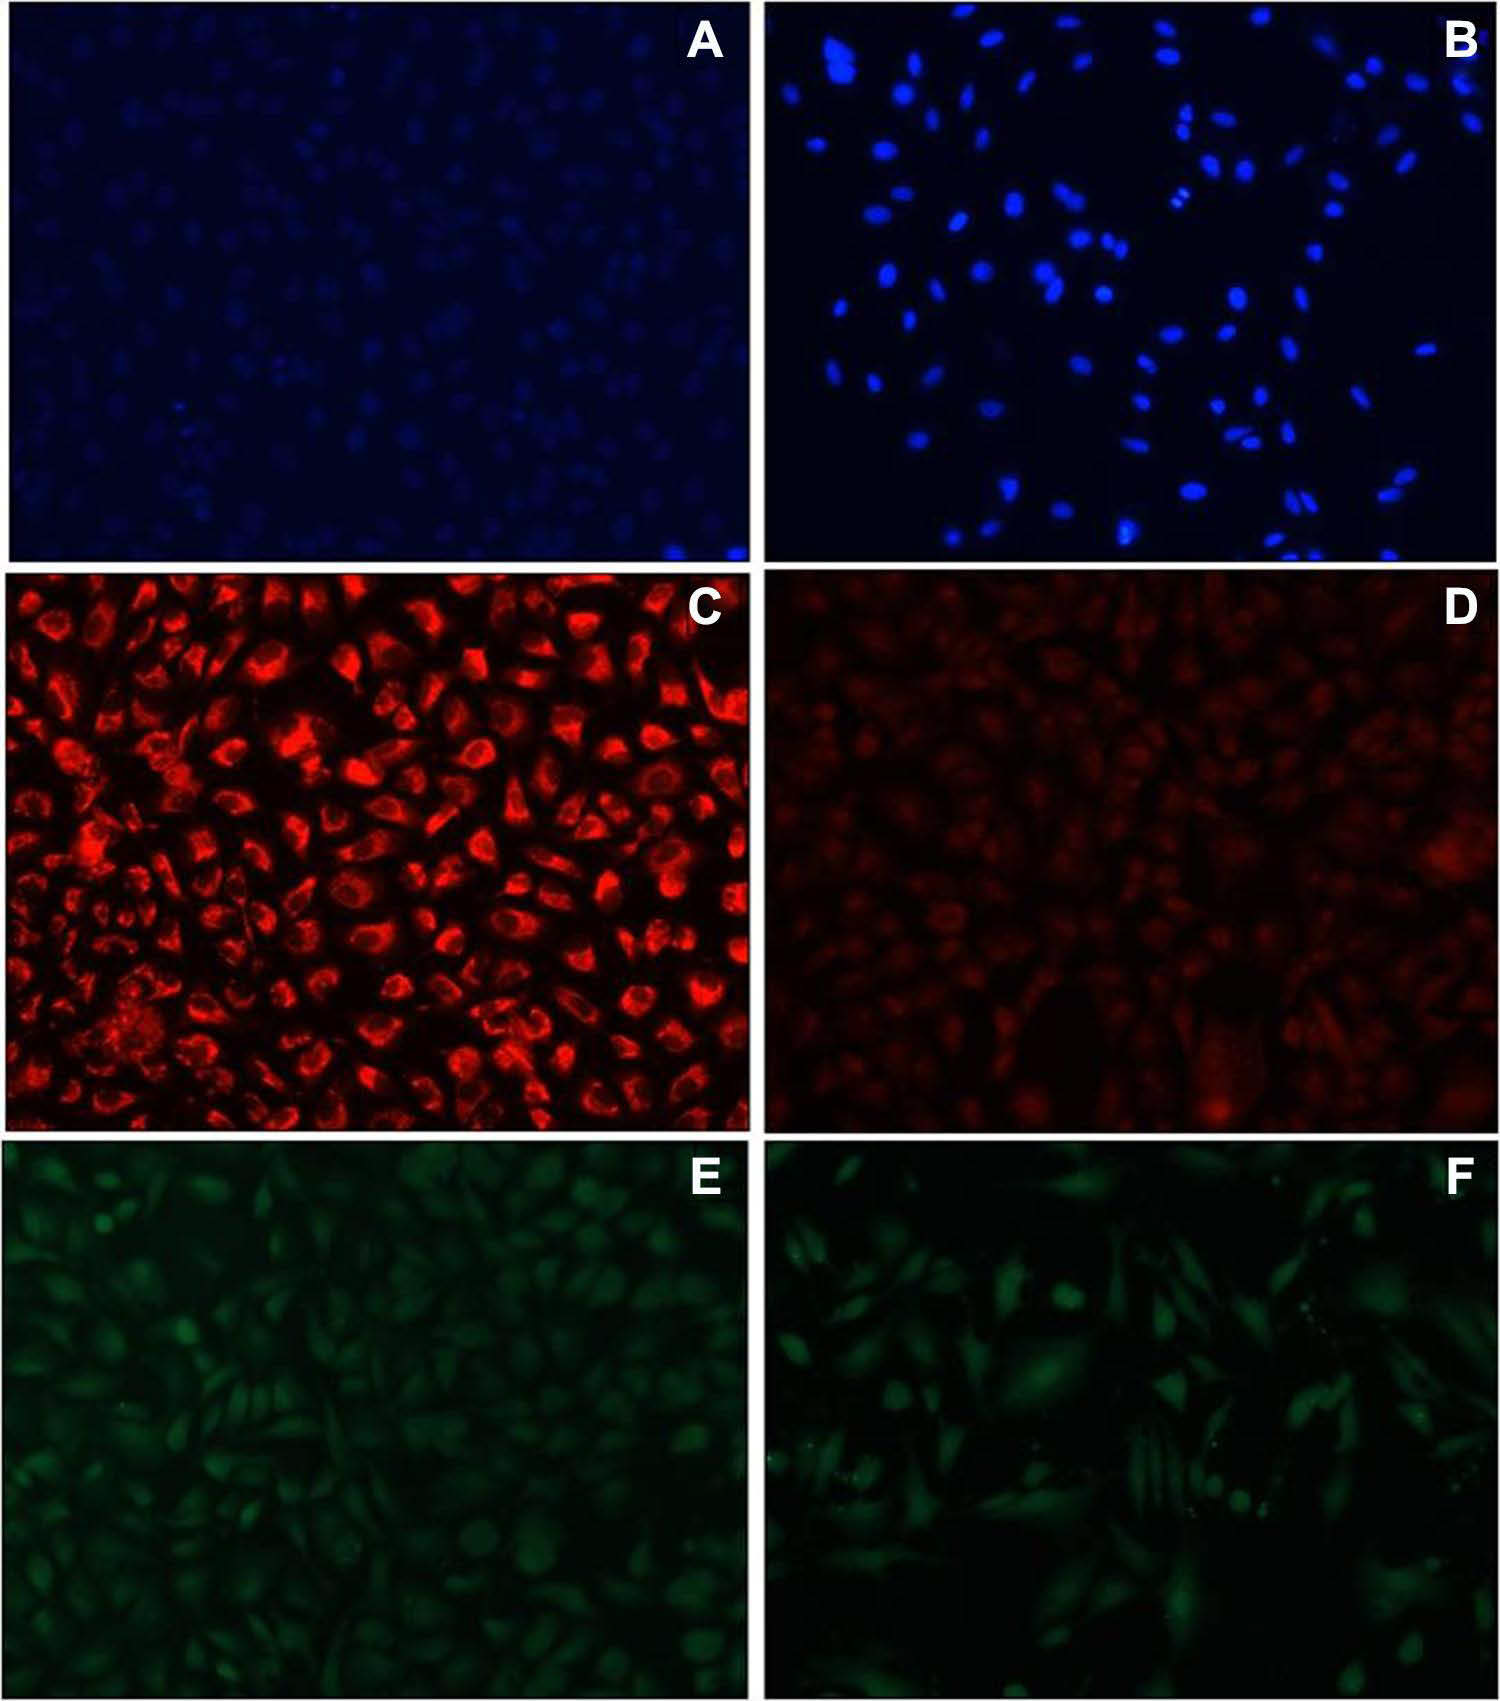 Images observed for AgNPs treated cells under phase contrast microscope after 48 hours of treatment for DAPI staining (A) control (B) treated cells; for Mito Tracker Red staining (C) control (D) treated cells and for DCFDA staining (E) control (F) treated cells.